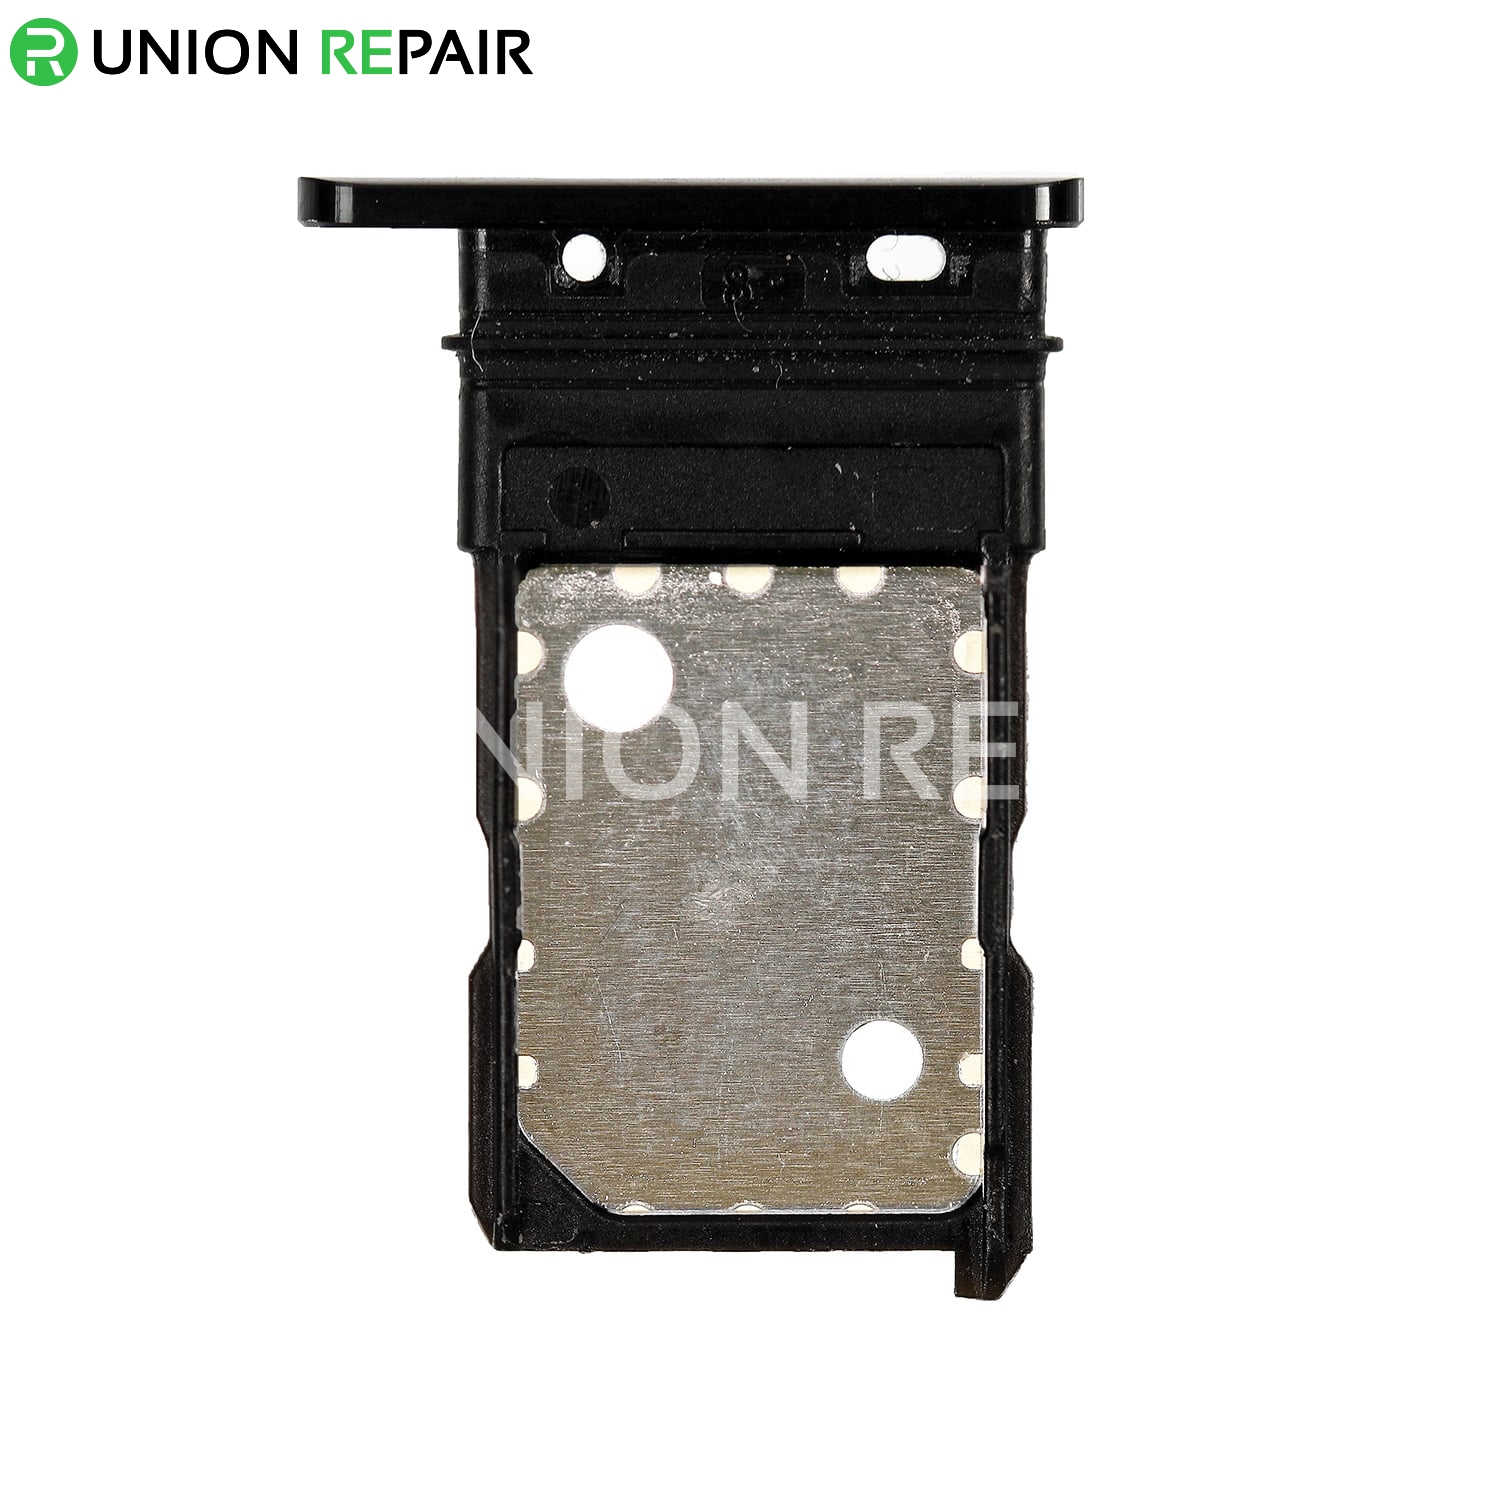 19096-replacement-for-google-pixel-3-sim-card-tray-black-1.jpg